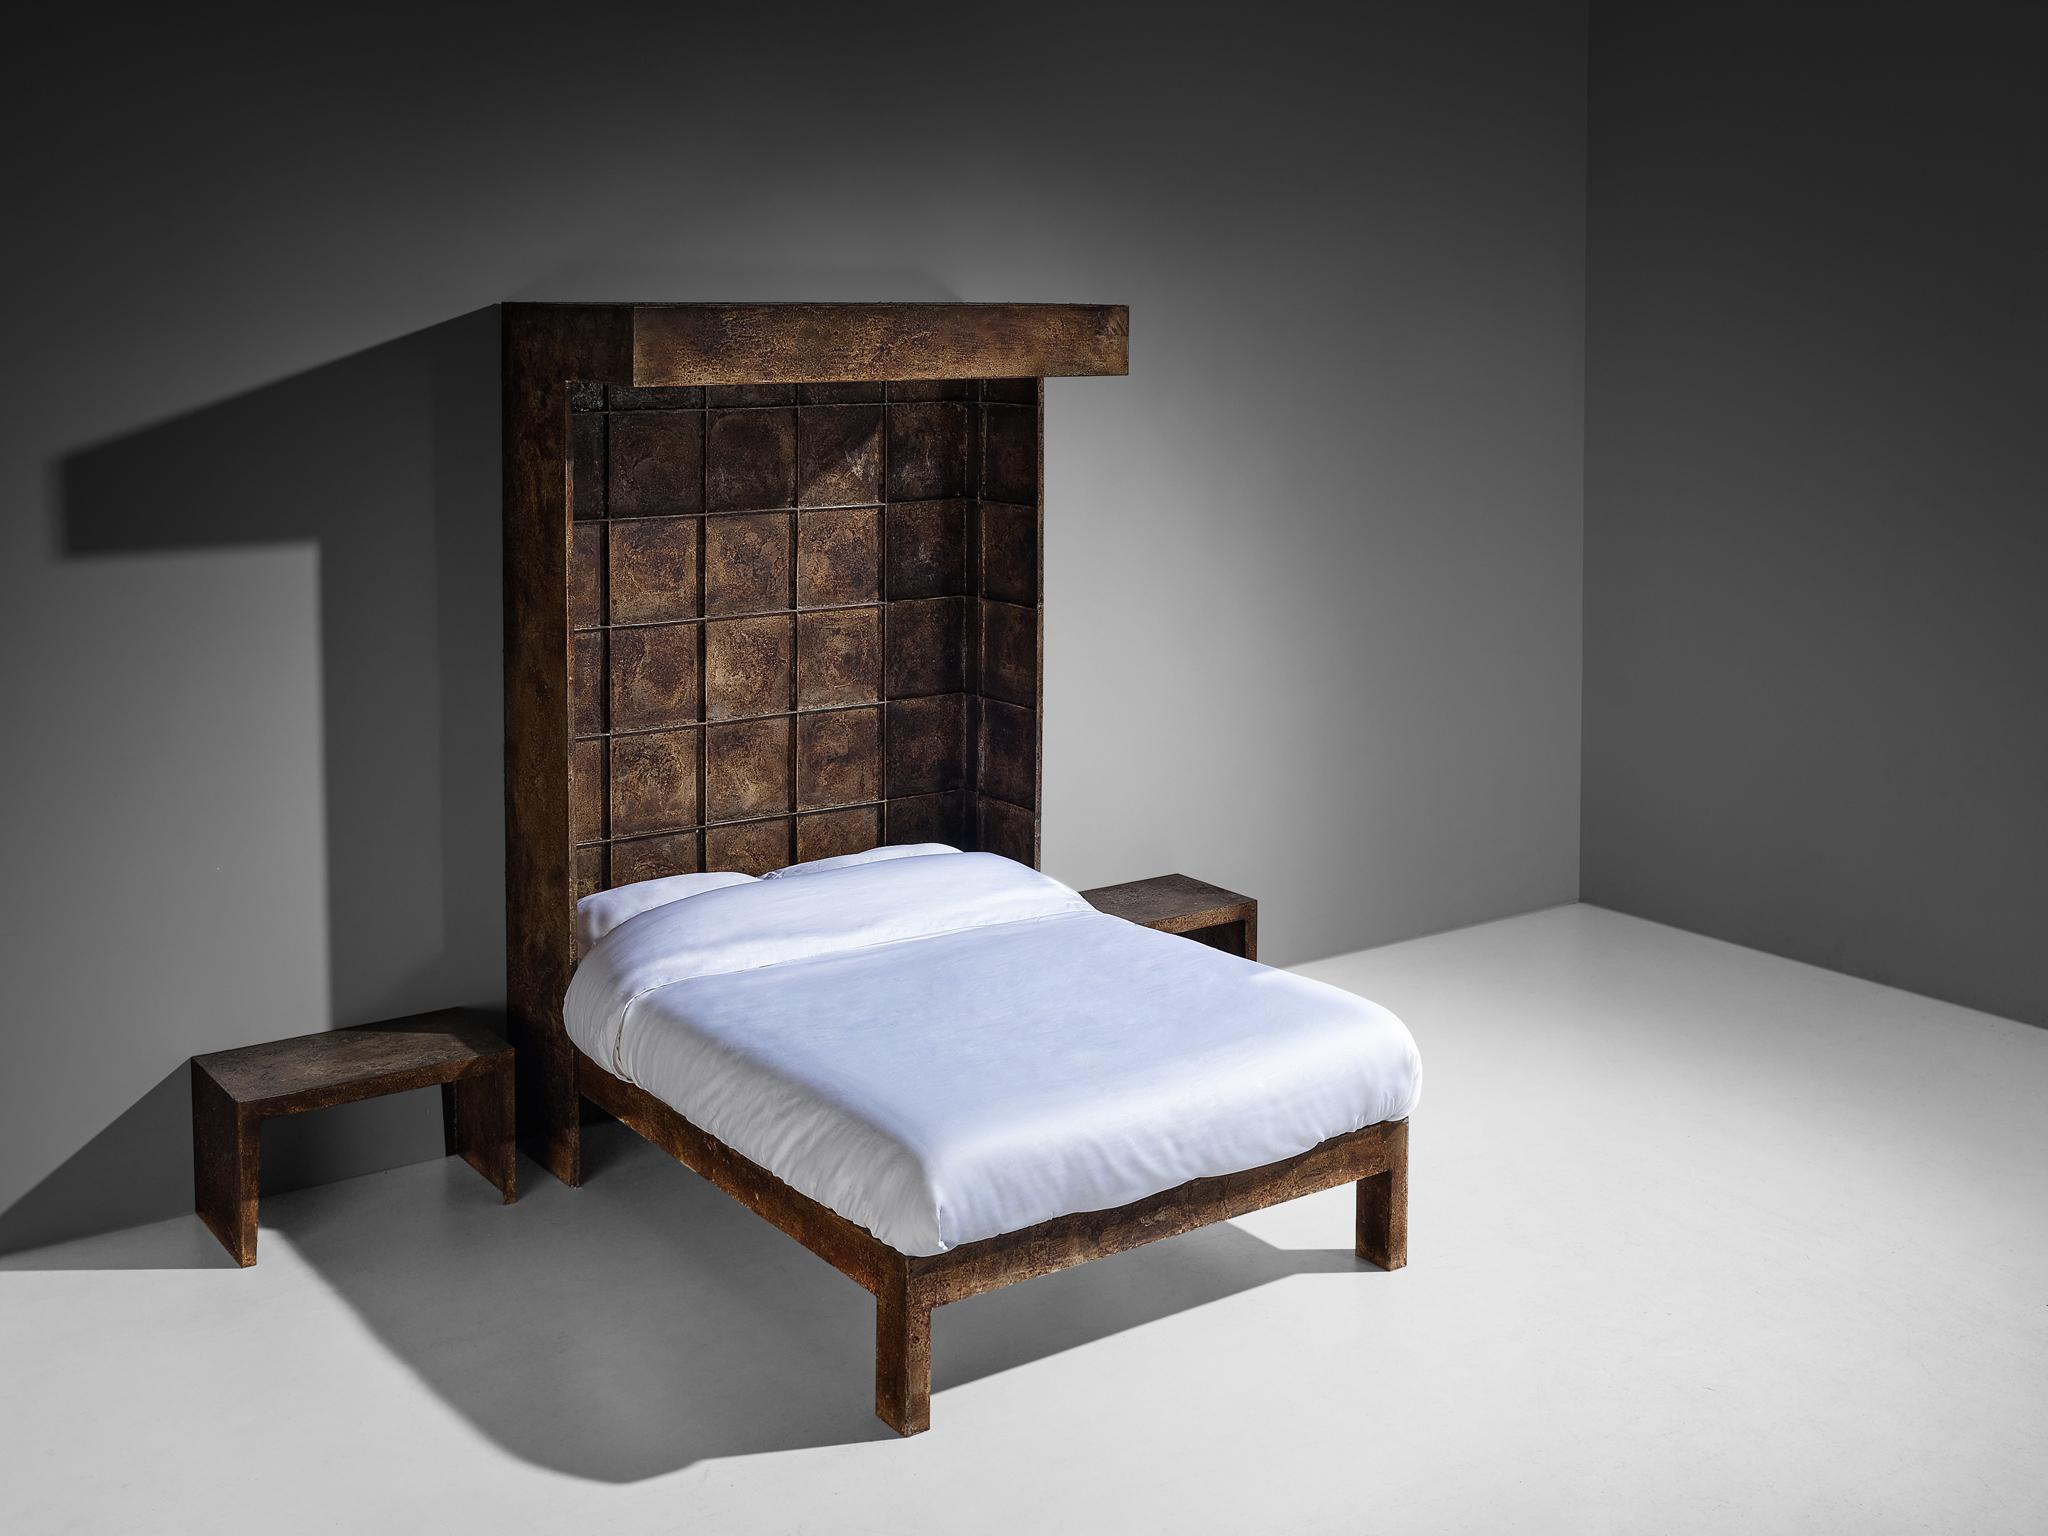 Pia Manu, bed with nightstands, wrought iron, Belgium, 1960s 

This one of a kind bedroom set designed in the workshop of Pia Manu is truly spectacular. The most prominent feature is the sizeable headboard that, like the whole set, is executed in